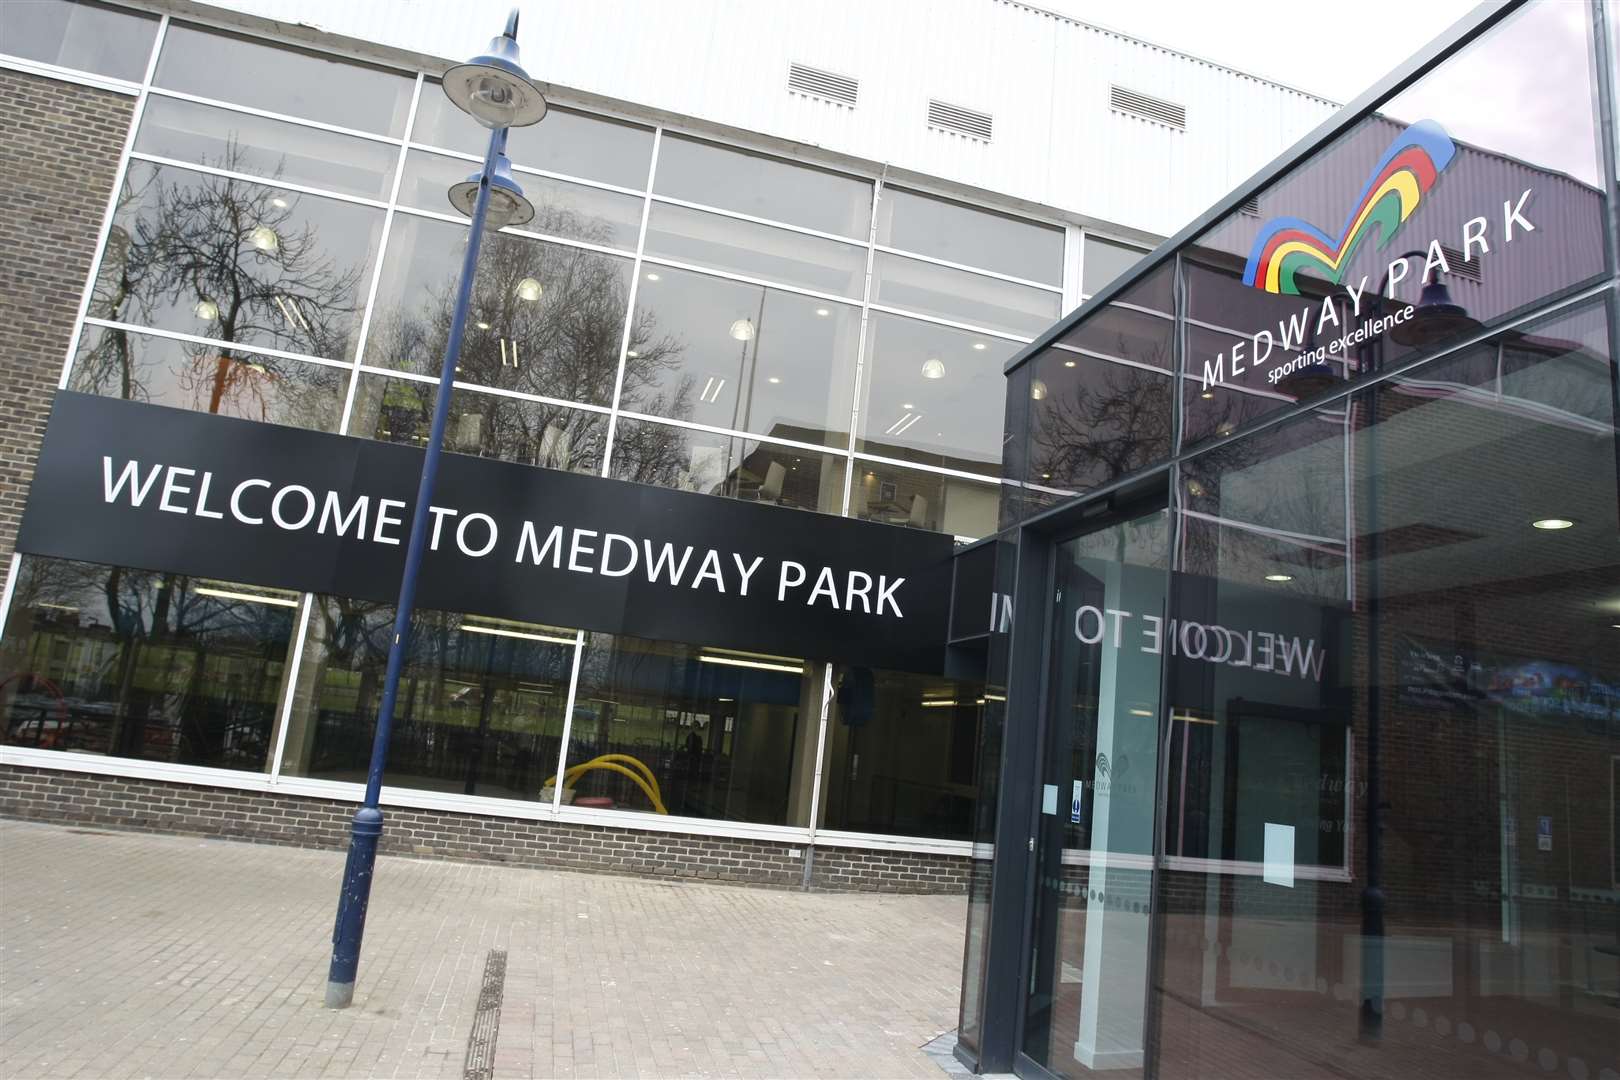 The man exposed himself at Medway Park